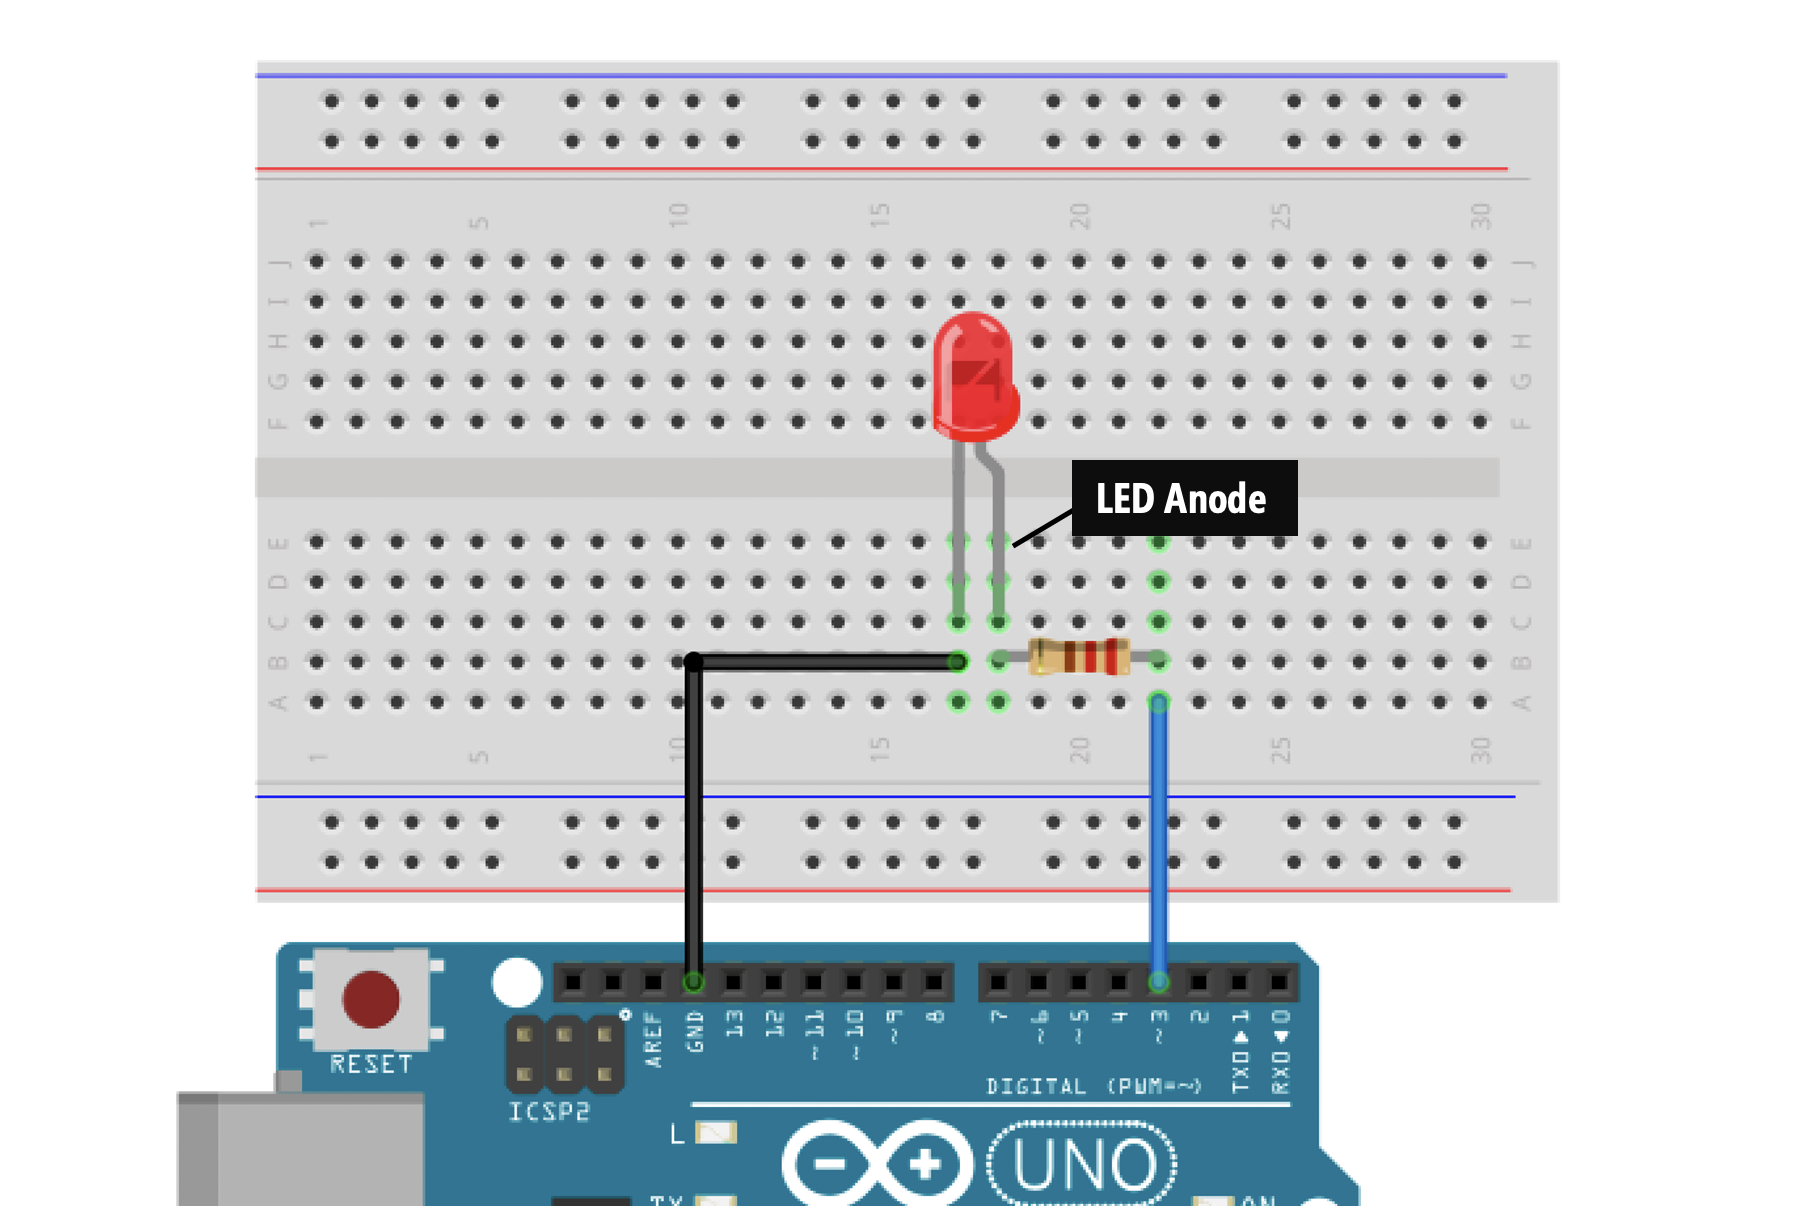 Breadboard wiring diagram showing LED cathode wired to GND and LED anode wired to a 220 Ohm resistor and then to Pin 3